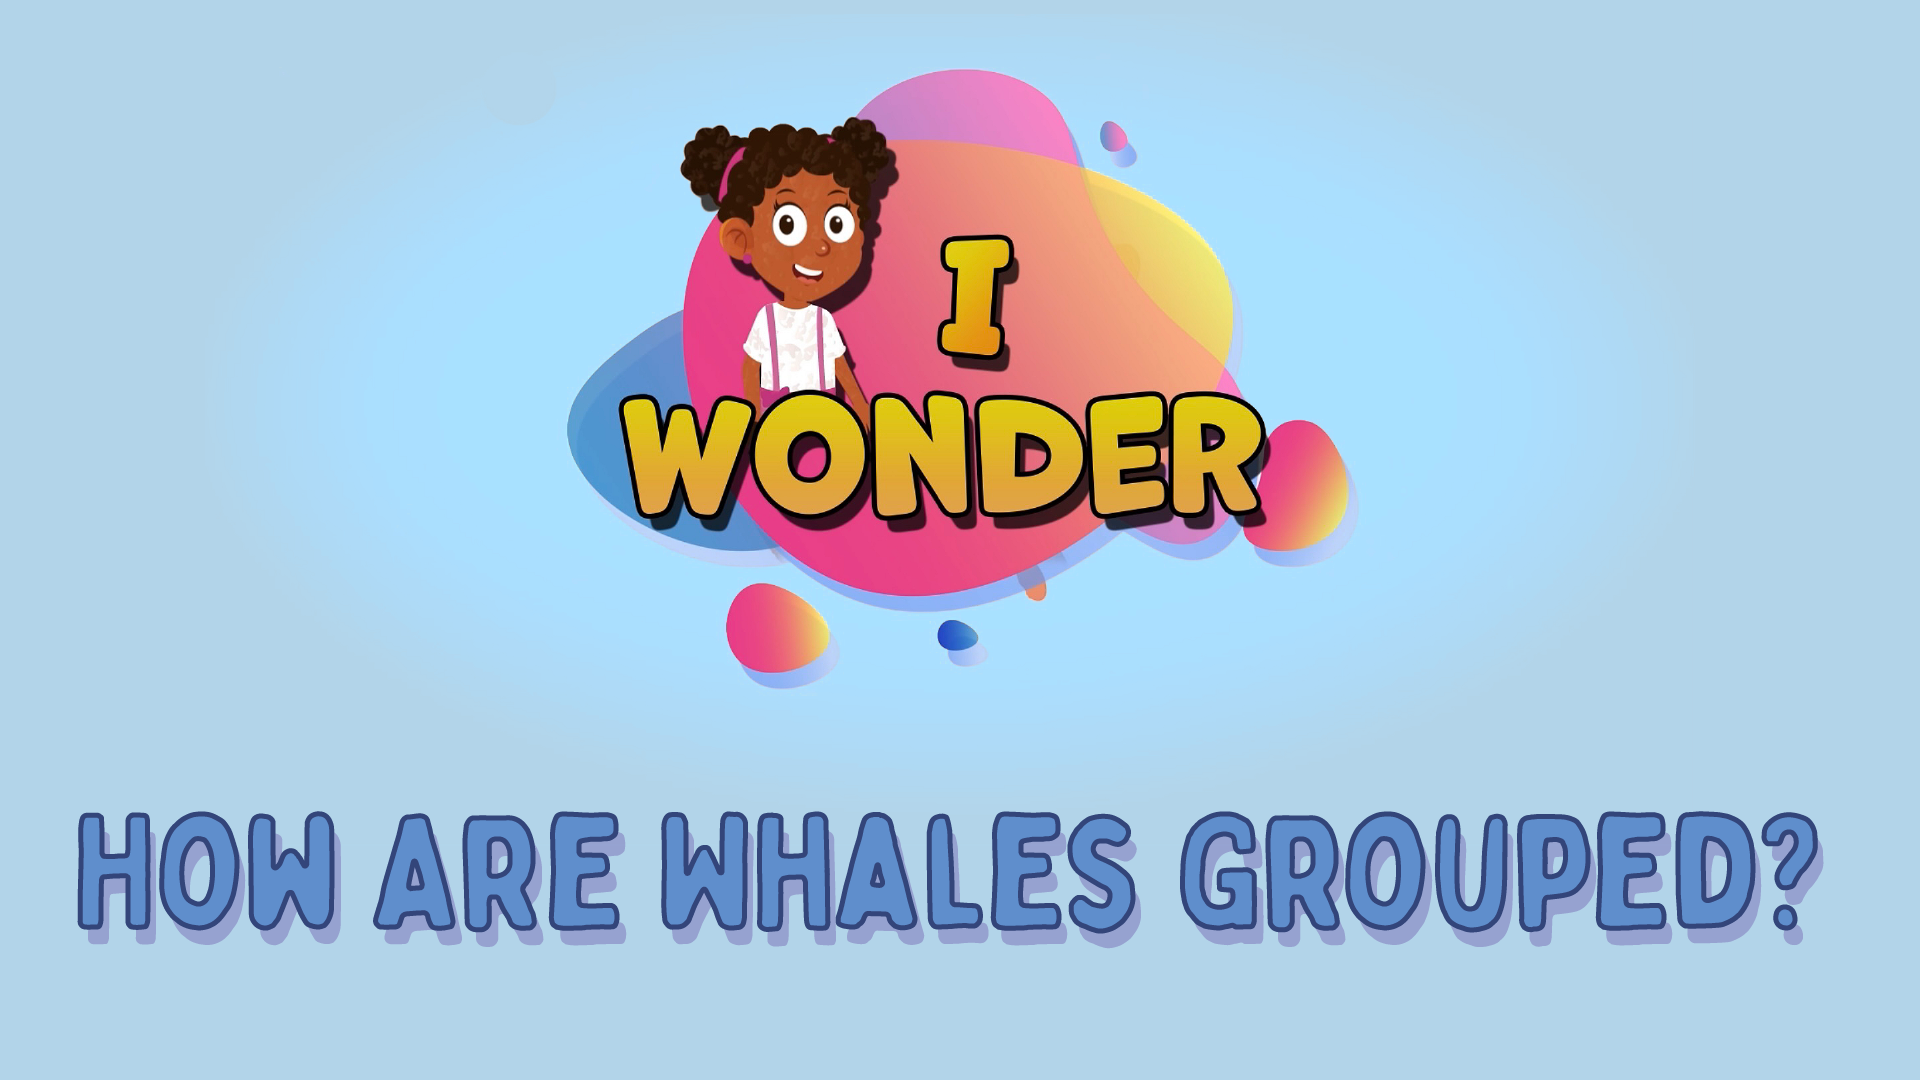 How Are Whales Grouped?